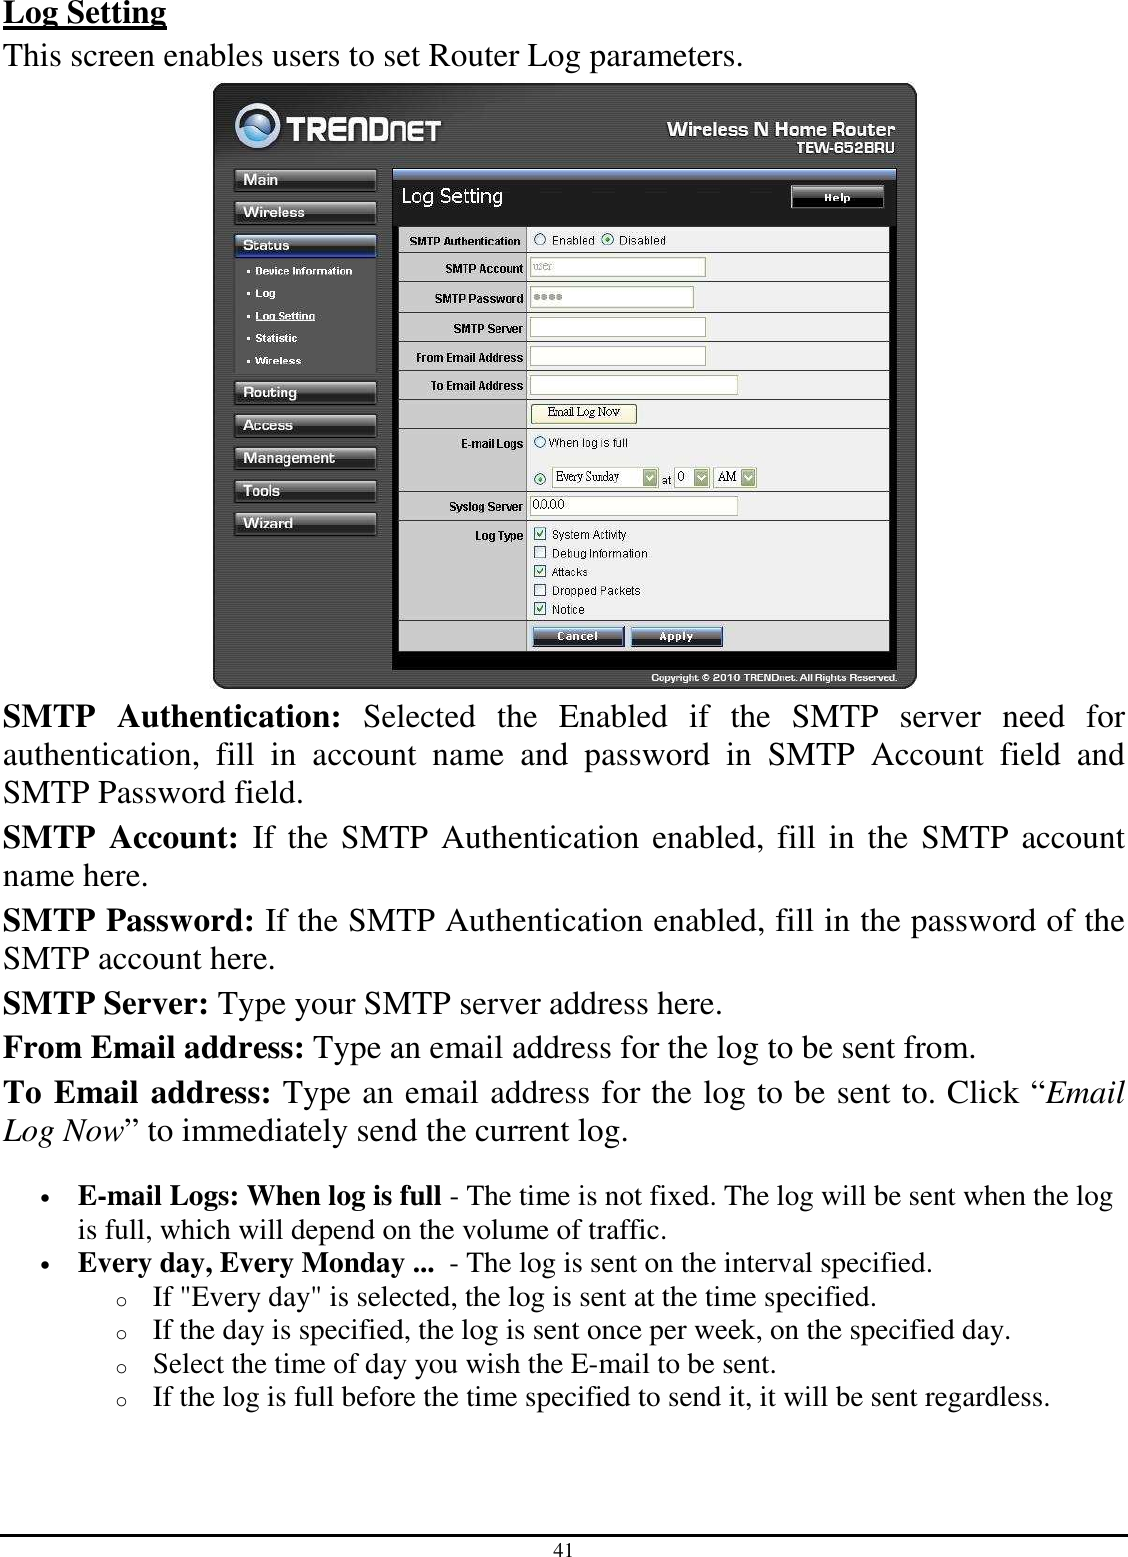 41 Log Setting This screen enables users to set Router Log parameters.  SMTP  Authentication:  Selected  the  Enabled  if  the  SMTP  server  need  for authentication,  fill  in  account  name  and  password  in  SMTP  Account  field  and SMTP Password field. SMTP  Account:  If the SMTP Authentication enabled, fill in the SMTP account name here. SMTP Password: If the SMTP Authentication enabled, fill in the password of the SMTP account here. SMTP Server: Type your SMTP server address here. From Email address: Type an email address for the log to be sent from. To Email address: Type an email address for the log to be sent to. Click “Email Log Now” to immediately send the current log. • E-mail Logs: When log is full - The time is not fixed. The log will be sent when the log is full, which will depend on the volume of traffic.  • Every day, Every Monday ...  - The log is sent on the interval specified.  o If &quot;Every day&quot; is selected, the log is sent at the time specified.  o If the day is specified, the log is sent once per week, on the specified day.  o Select the time of day you wish the E-mail to be sent.  o If the log is full before the time specified to send it, it will be sent regardless. 